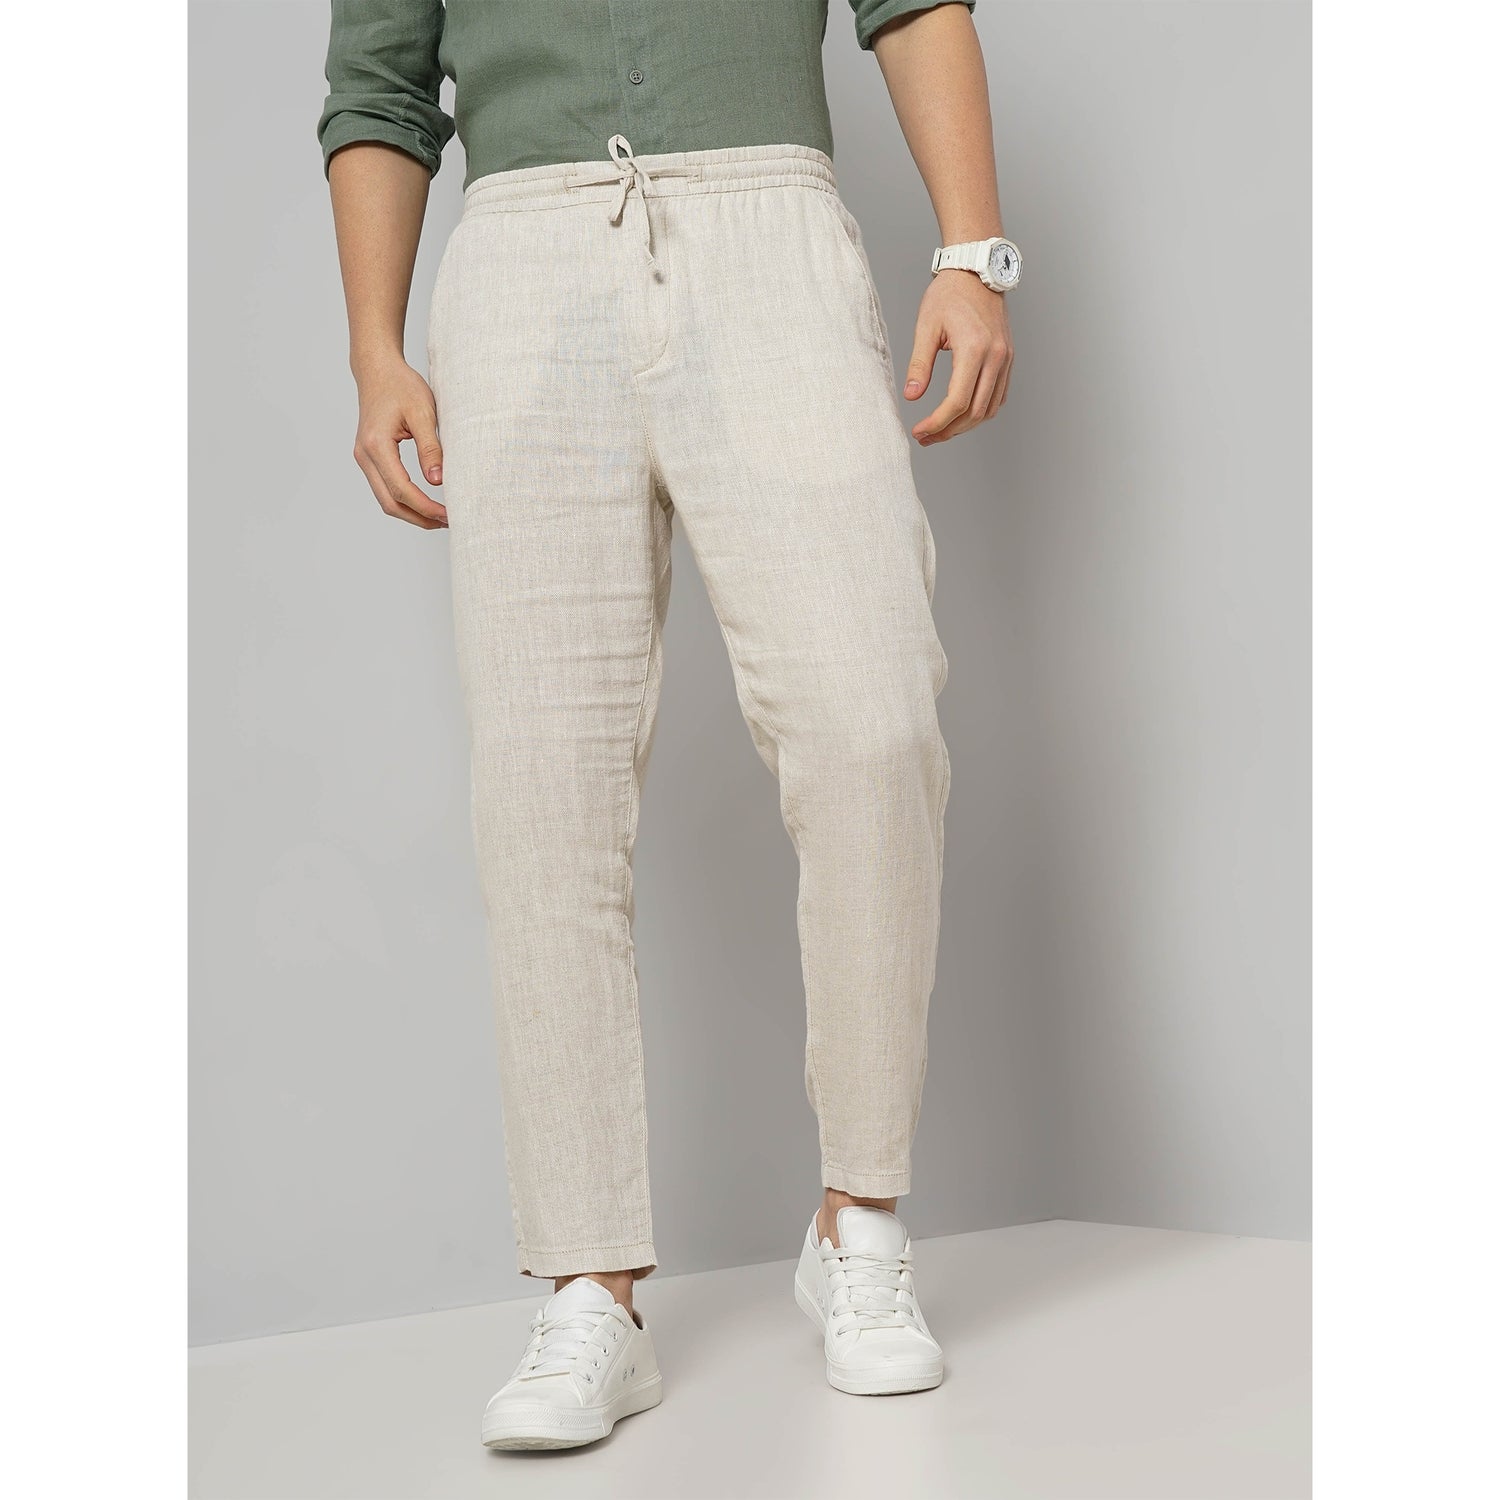 Men Off White Solid Regular Fit Linen Casual Trousers (DOLINUS)